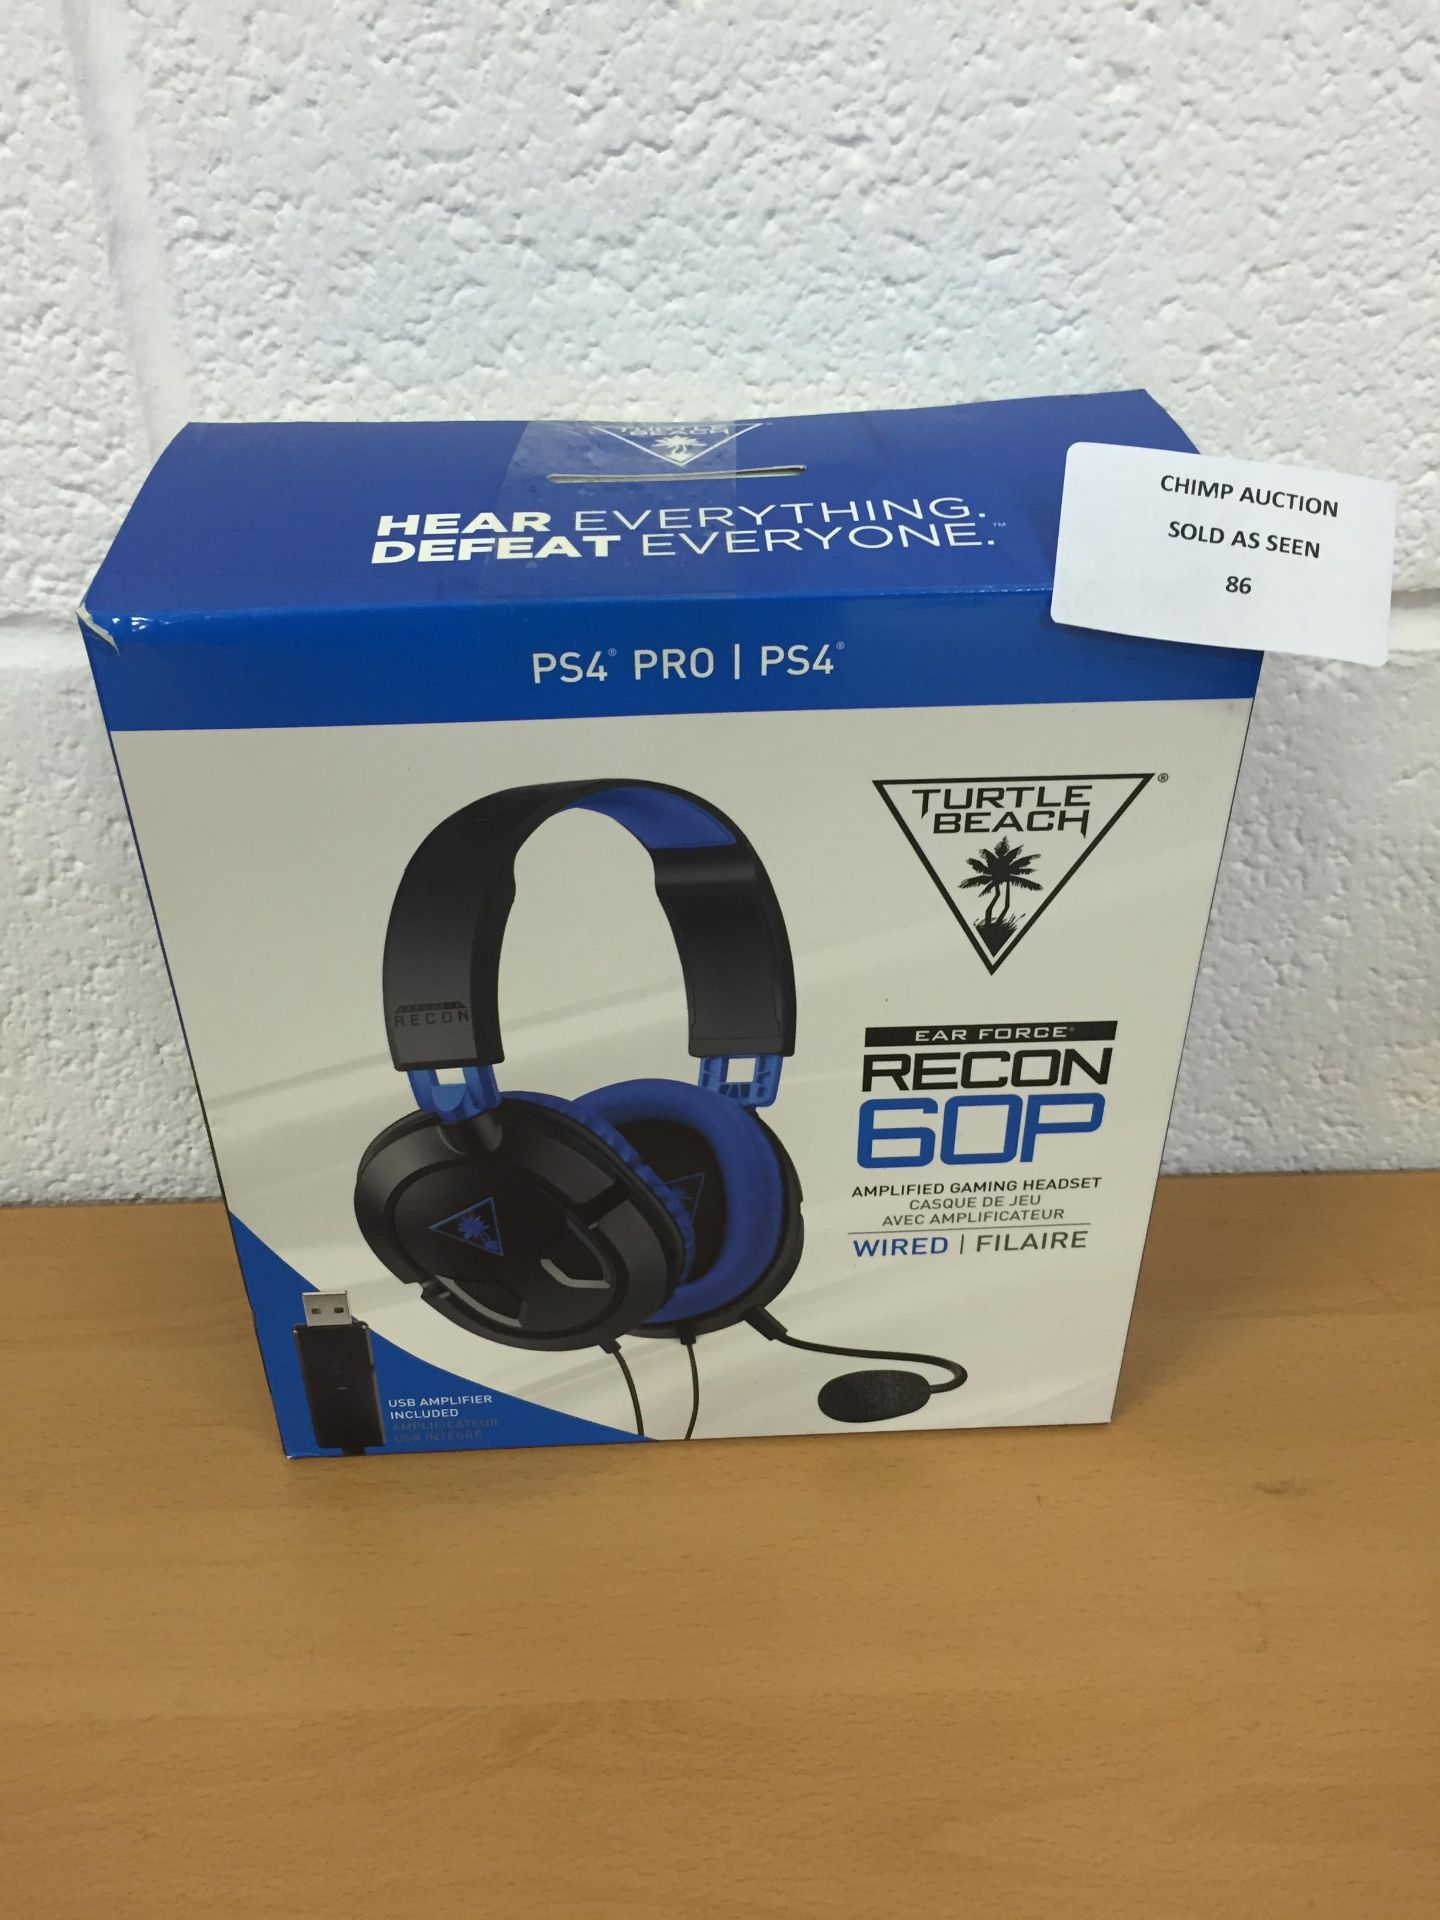 Turtle Beach Recon 60P Amplified Gaming Headset - PS4, Pro RRP £59.99.